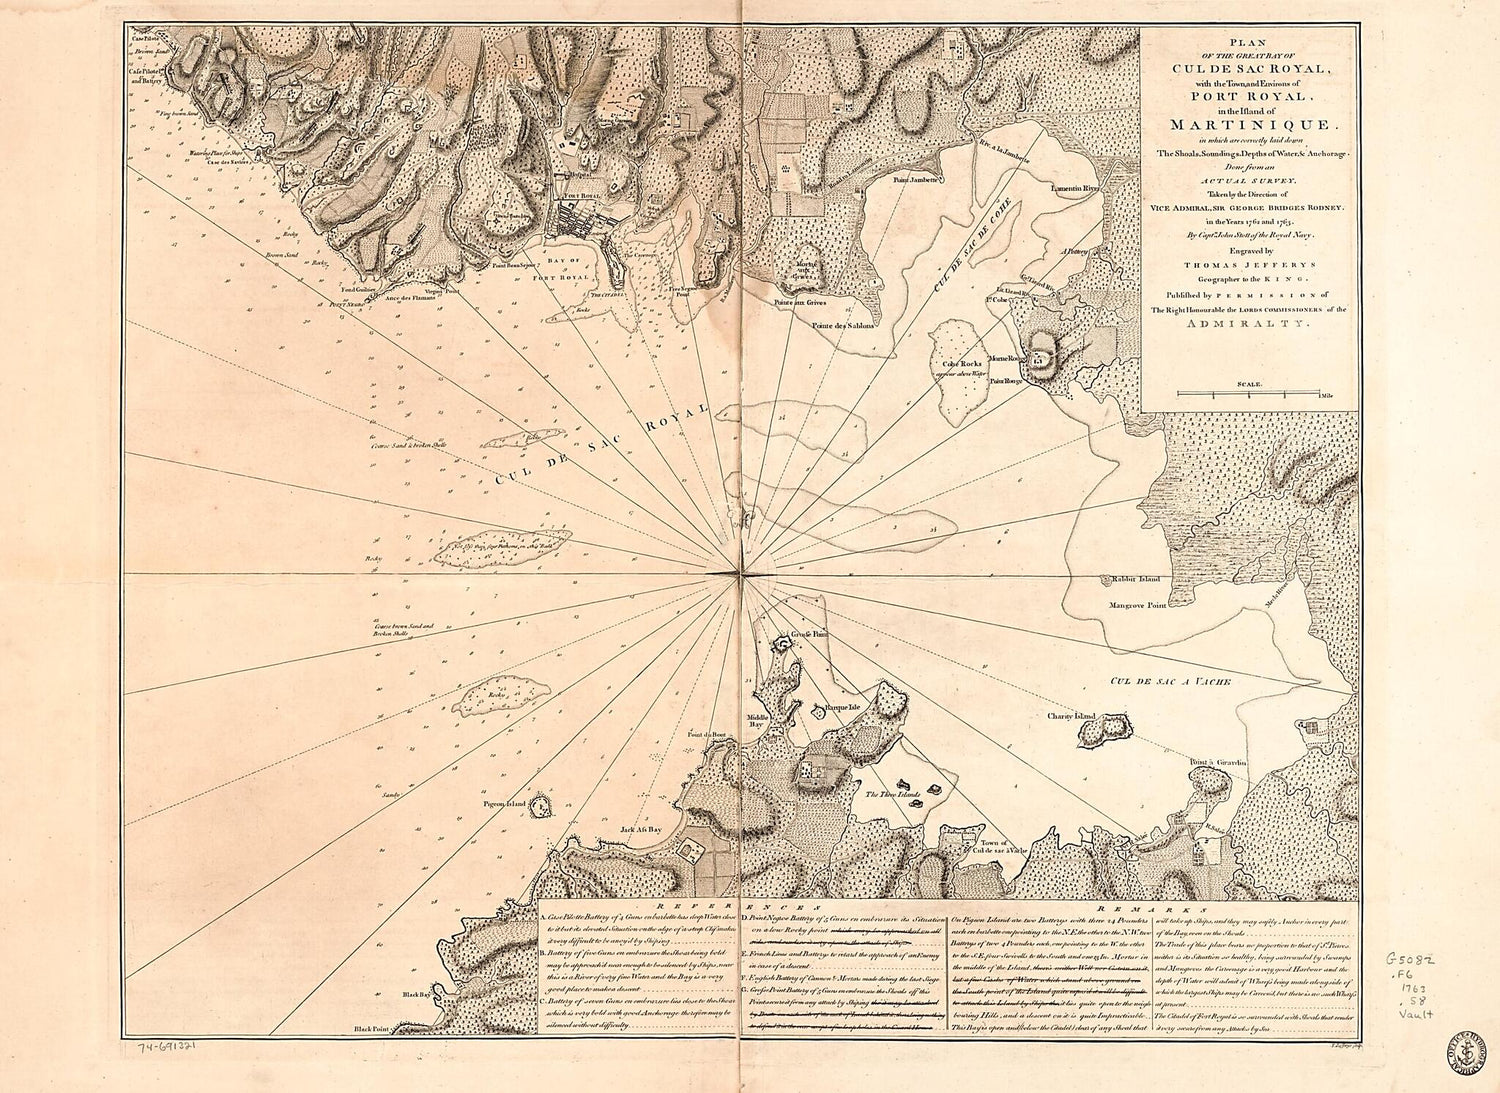 This old map of Plan of the Great Bay of Cul De Sac Royal, With the Town, and Environs of Port Royal, In the Island of Martinique, In Which Are Correctly Laid Down the Shoals, Soundings, Depths of Water, &amp; Anchorage from 1763 was created by Thomas Jeffer